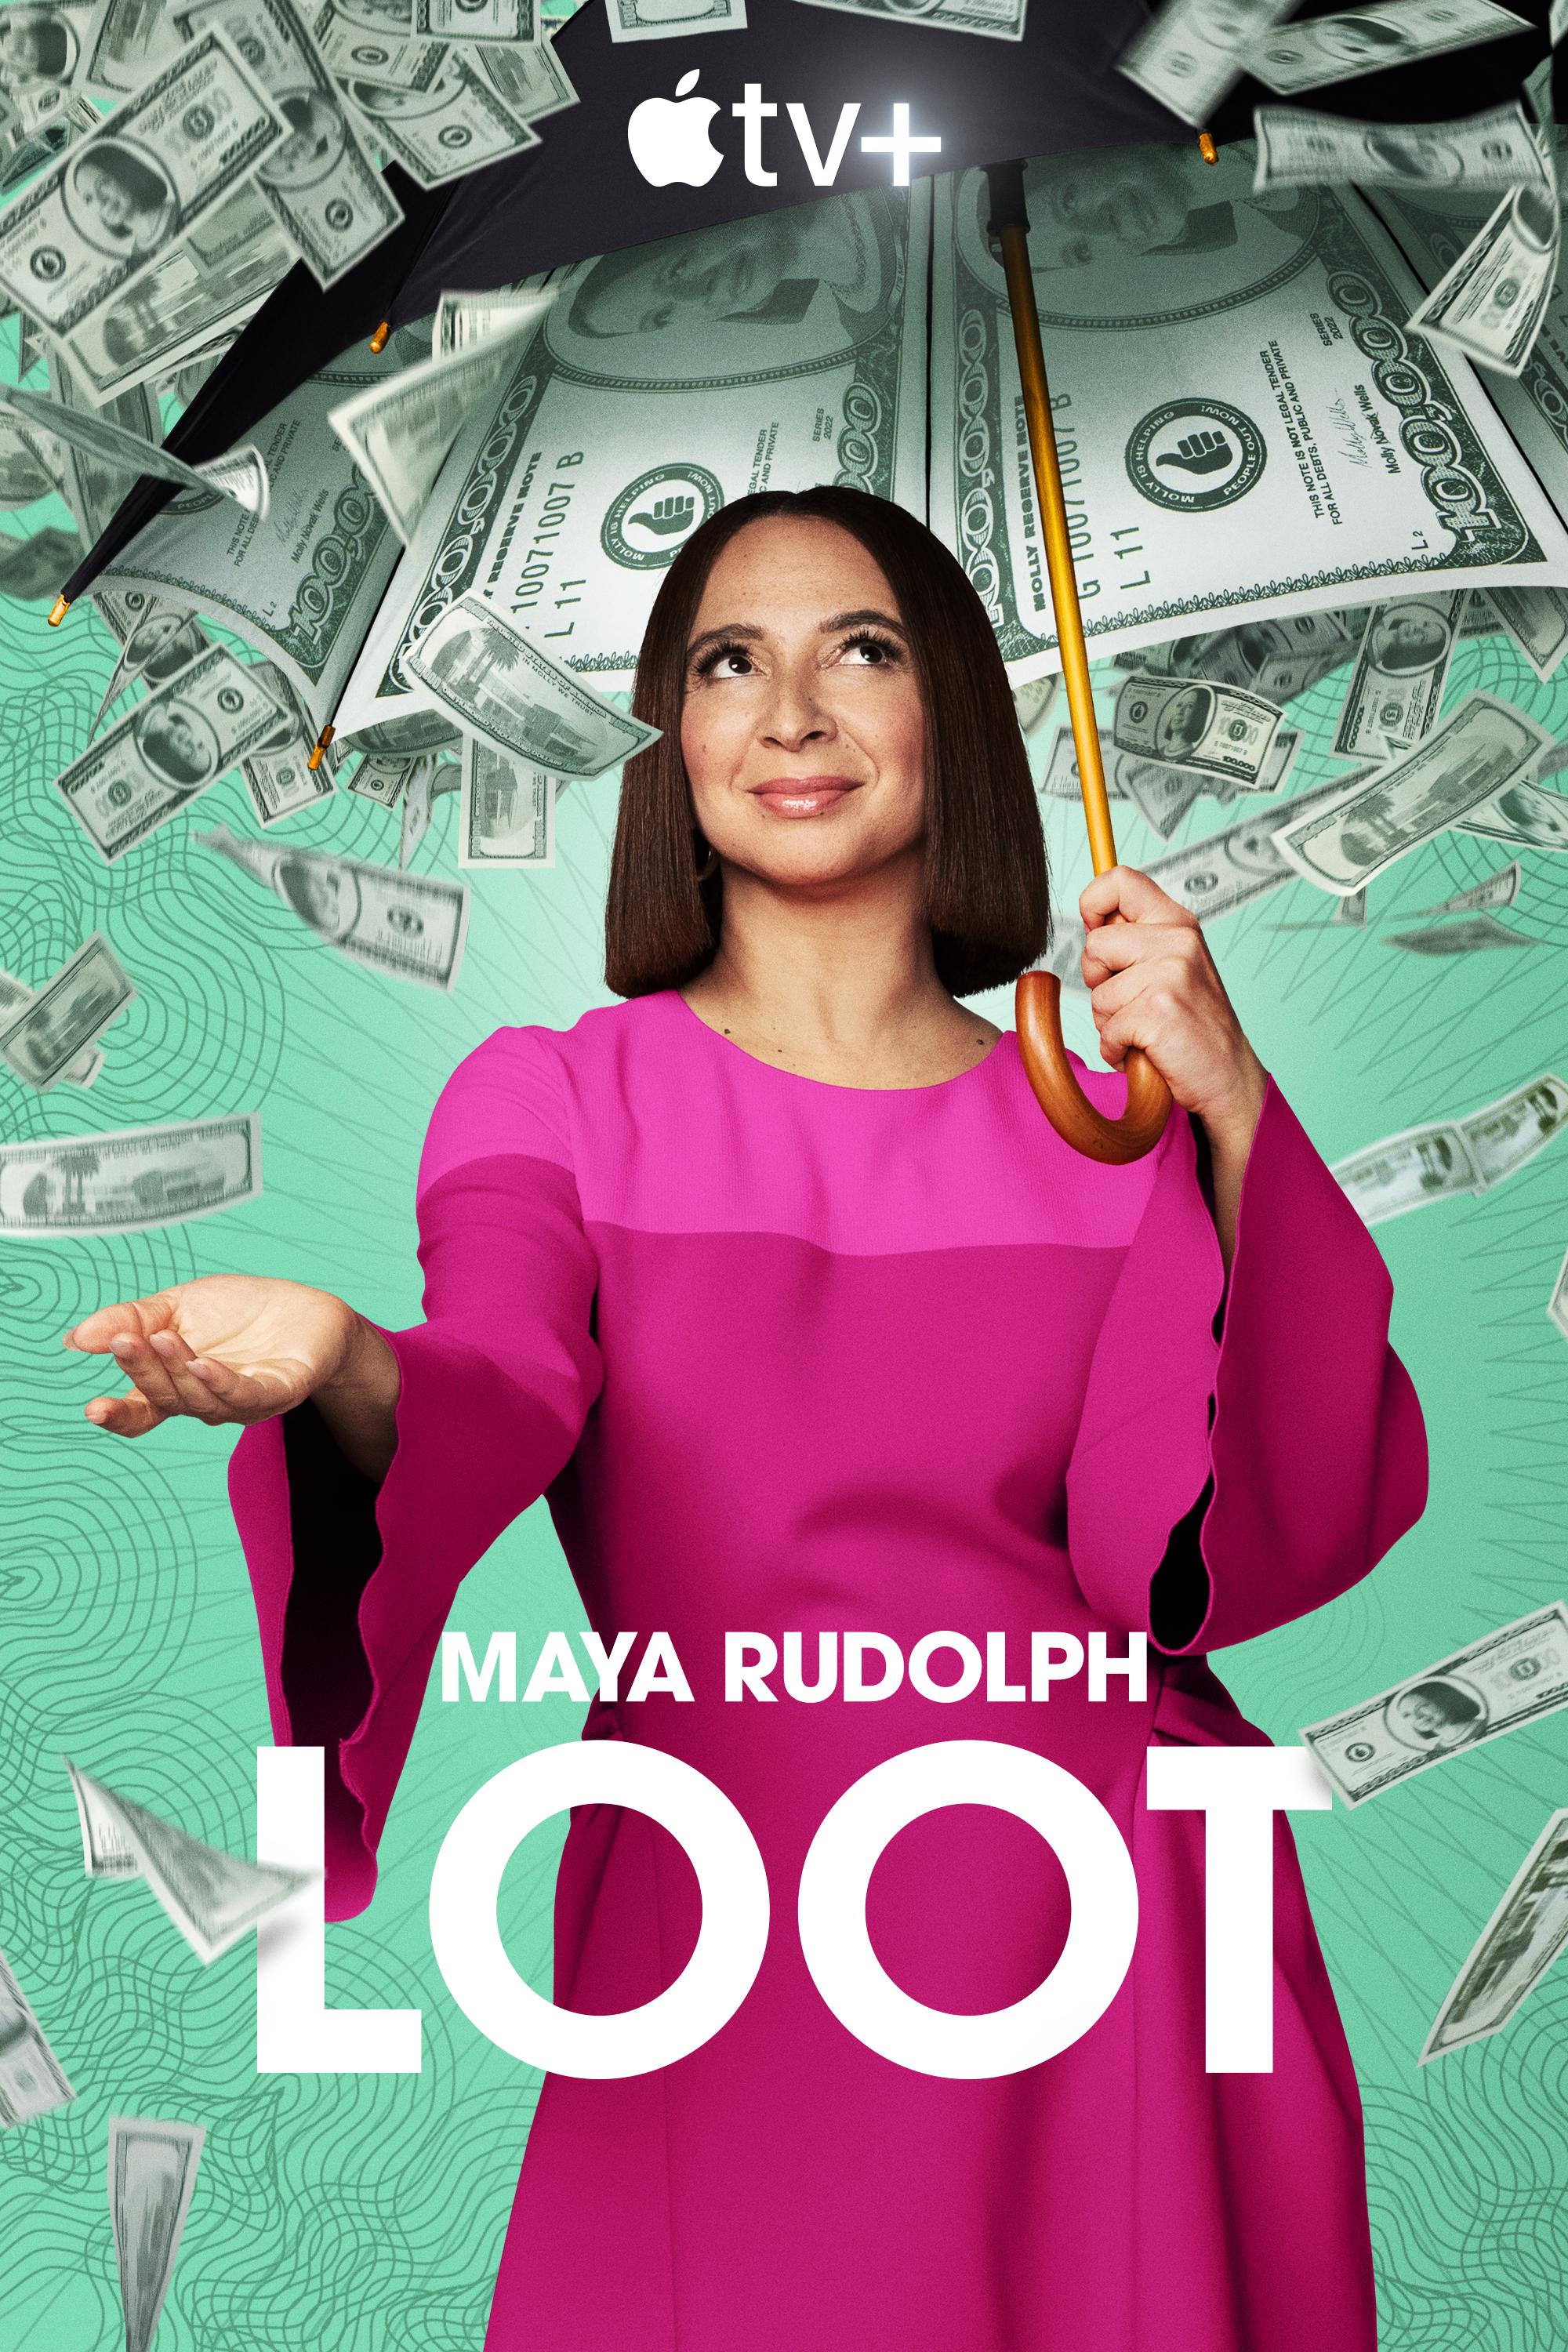 Loot Season 2 (April 3, Apple TV+)Maya Rudolph returns as billionaire Molly Wells in the highly-anticipated second season of Loot, where she navigates the challenges of philanthropy and personal growth. Joined by her loyal assistant Nicholas, Molly embarks on a journey of reinvention amidst a backdrop of intrigue and transformation.